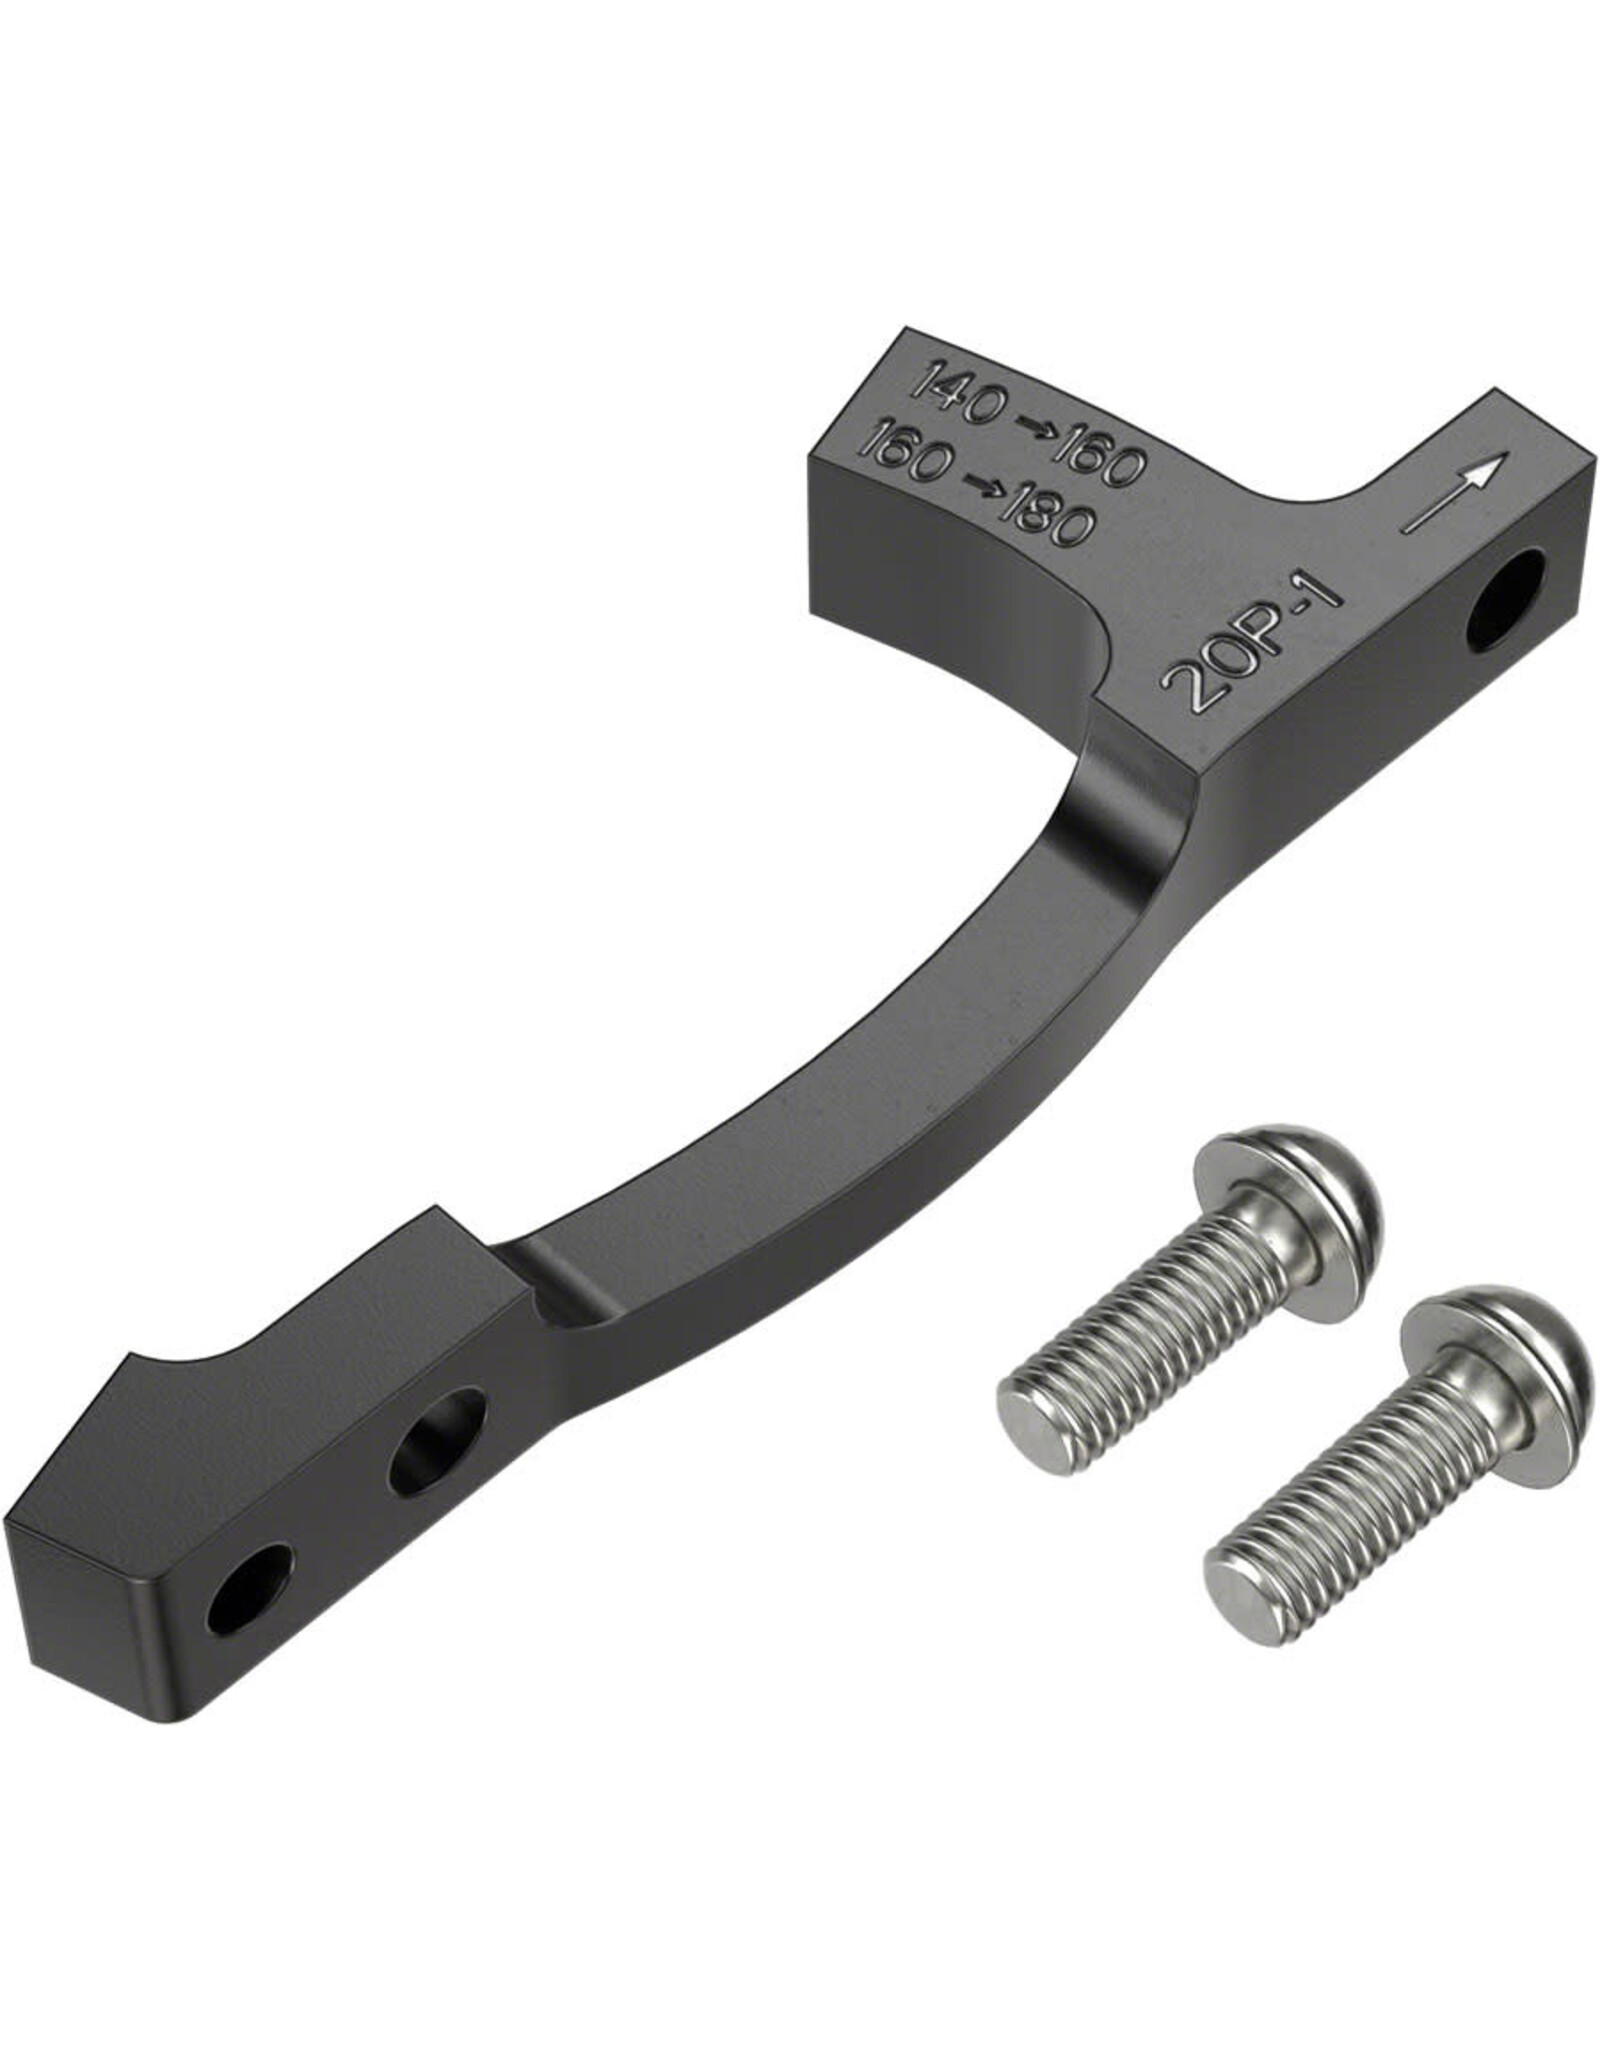 SRAM SRAM Post Bracket 20 P 1 Disc Brake Adaptor -  For 160mm and 180mm Rotors Only, Includes Bracket and Stainless Steel Bolts